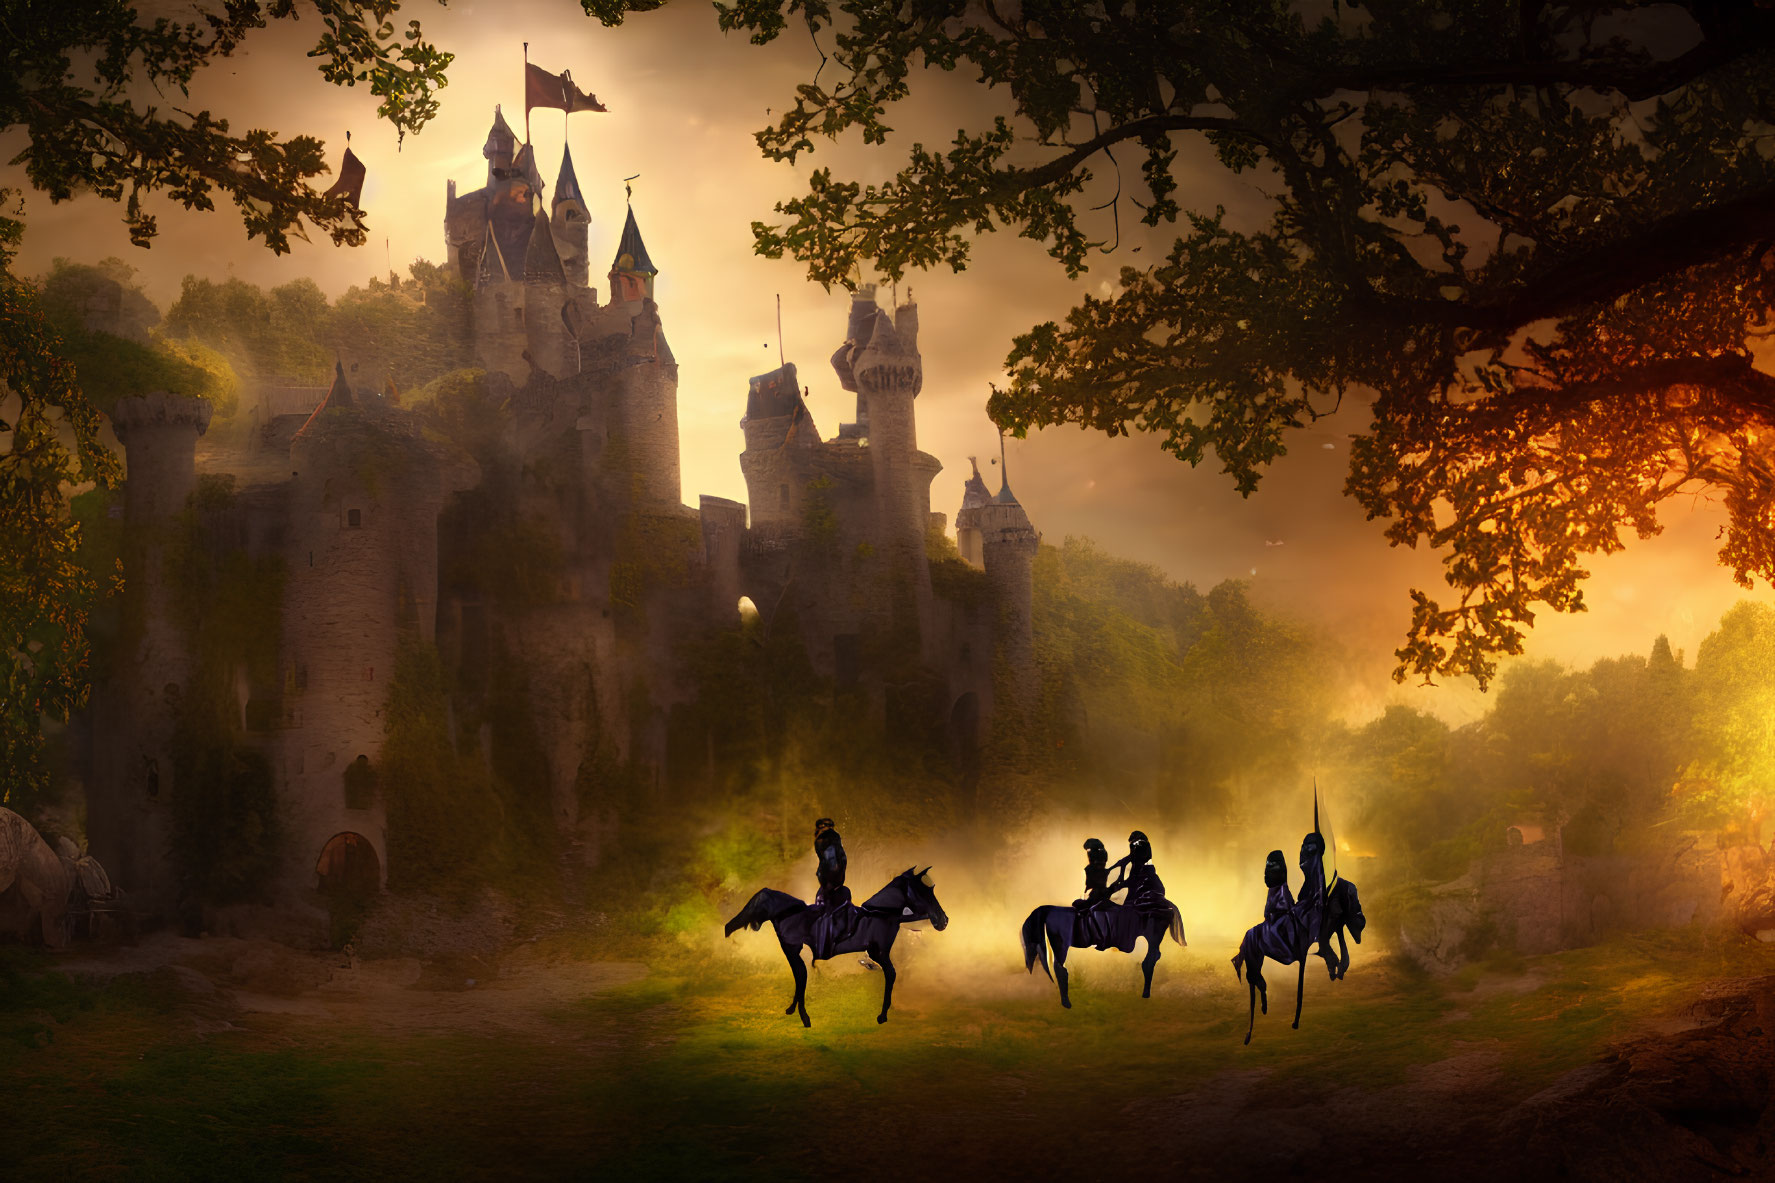 Mystical sunset backdrop with silhouetted knights on horseback and ancient castle